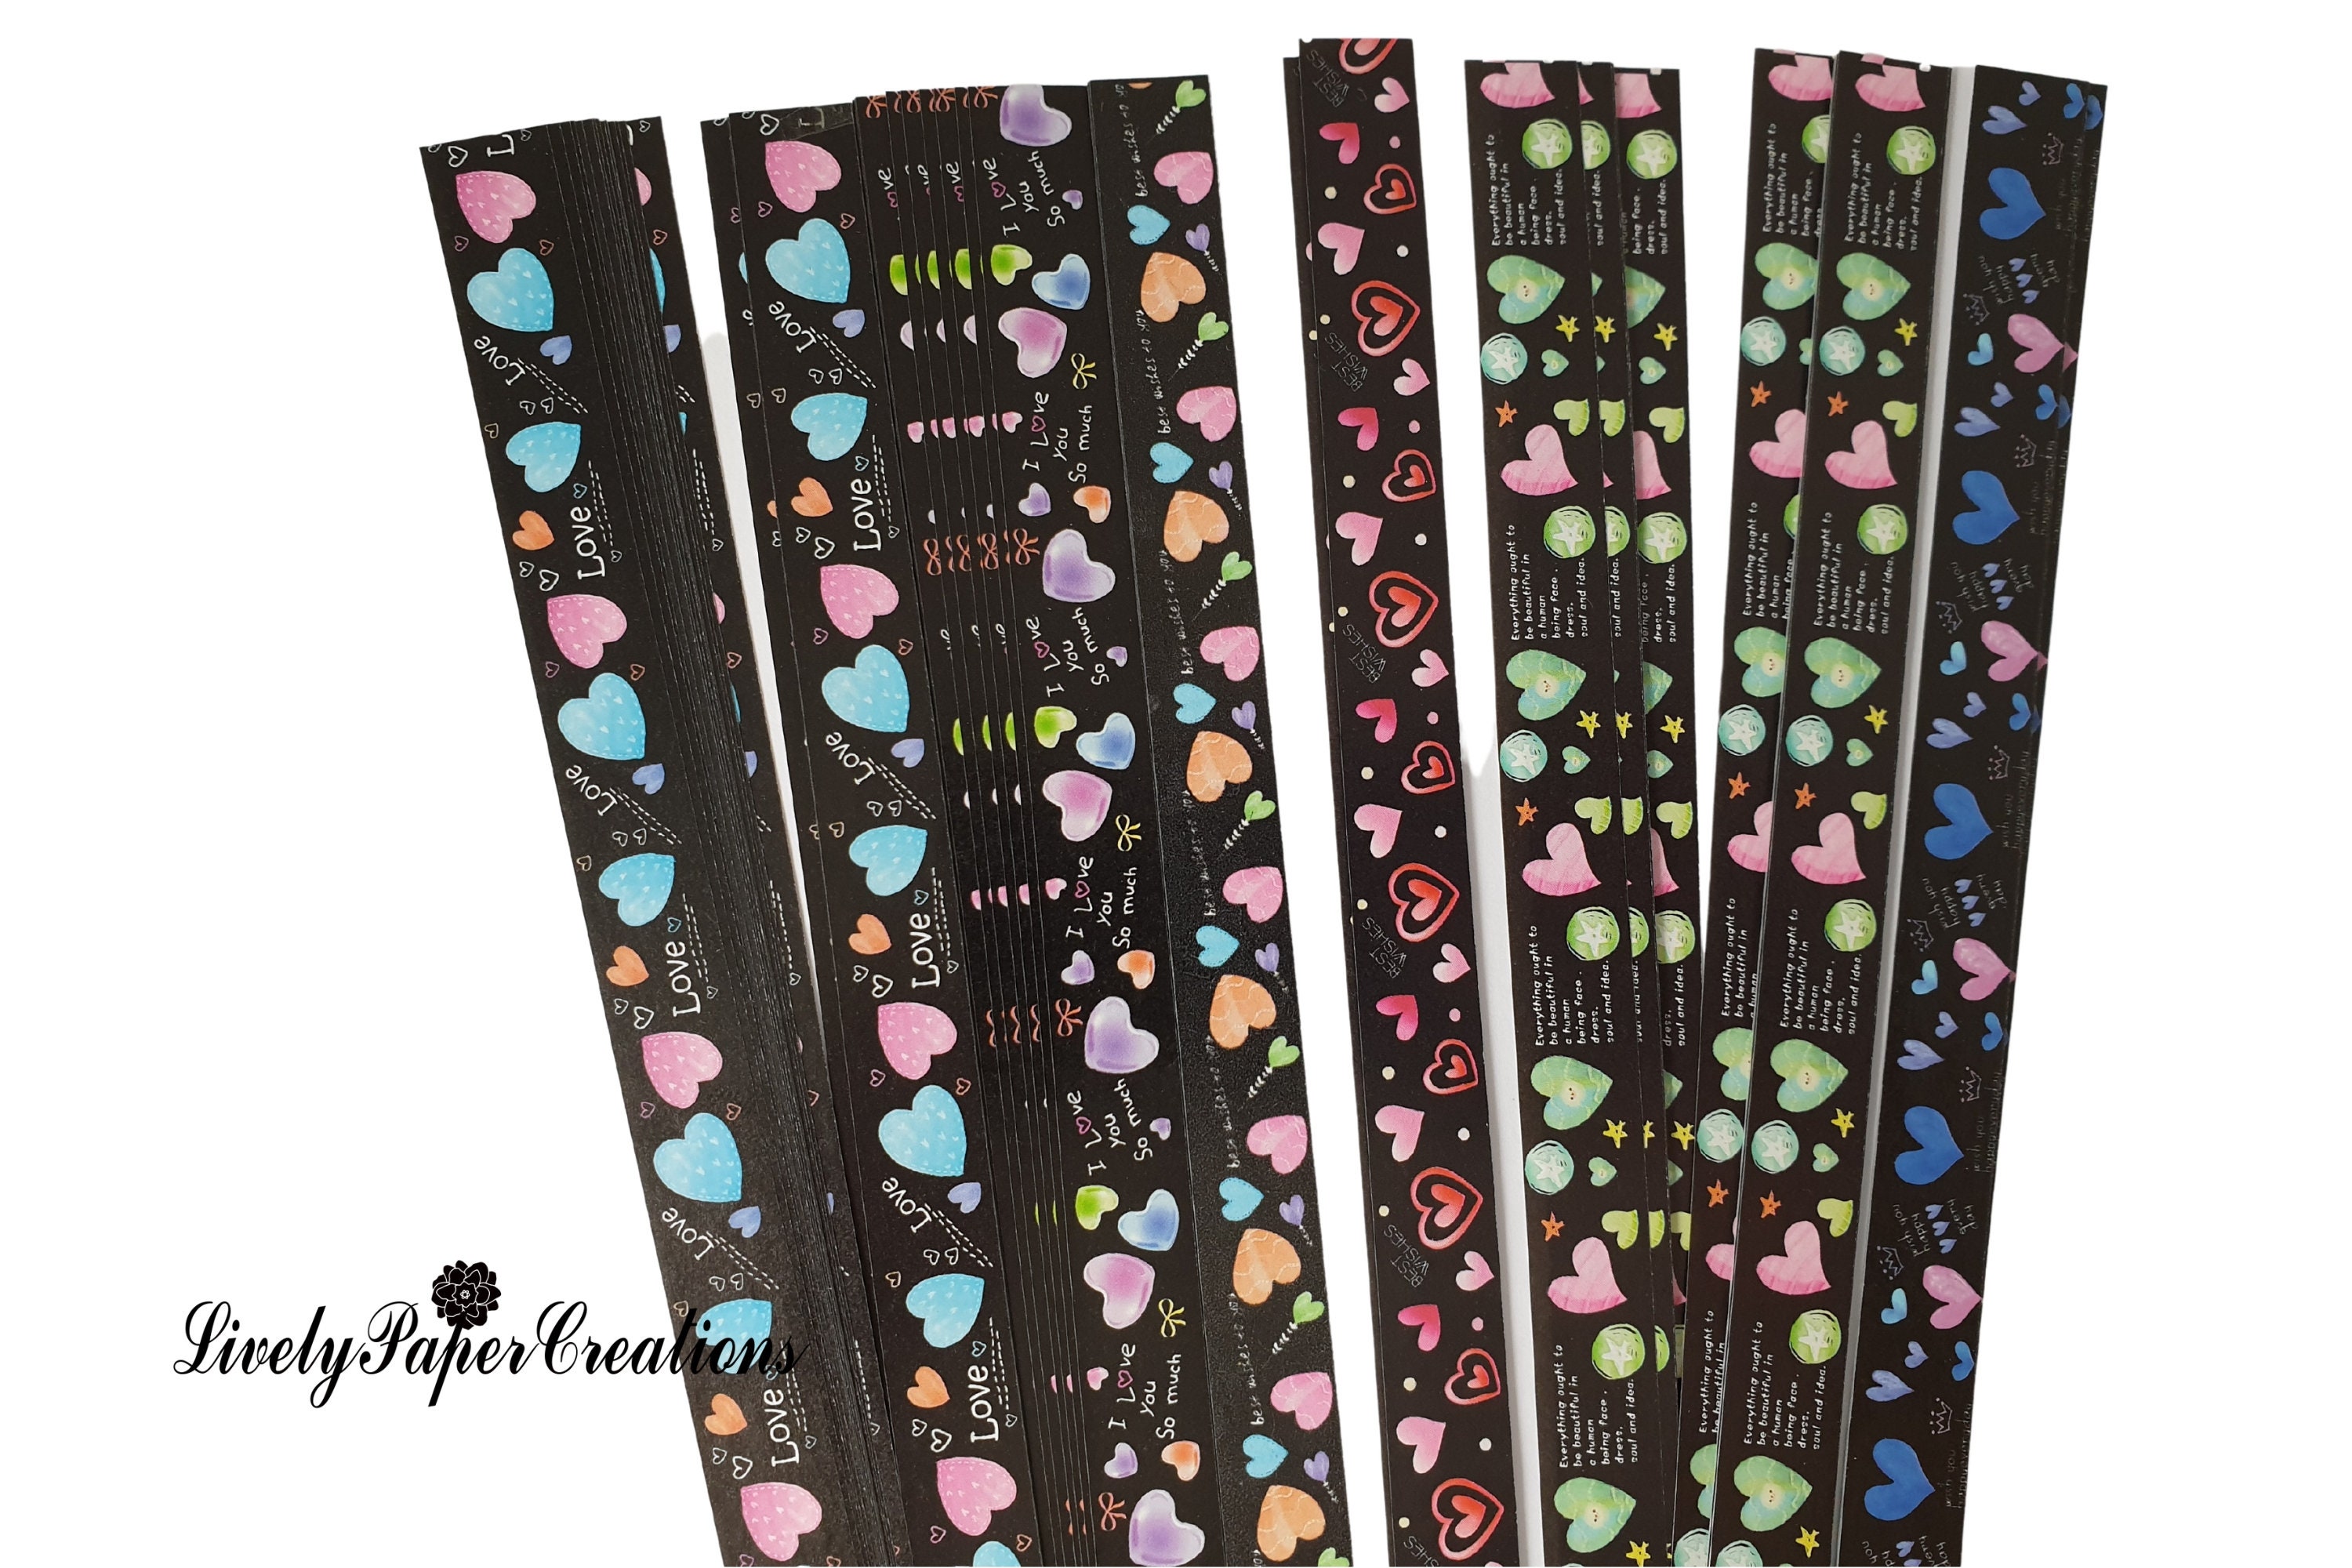 Hearts Vellum Glow in the Dark Origami Lucky Star Paper Strips